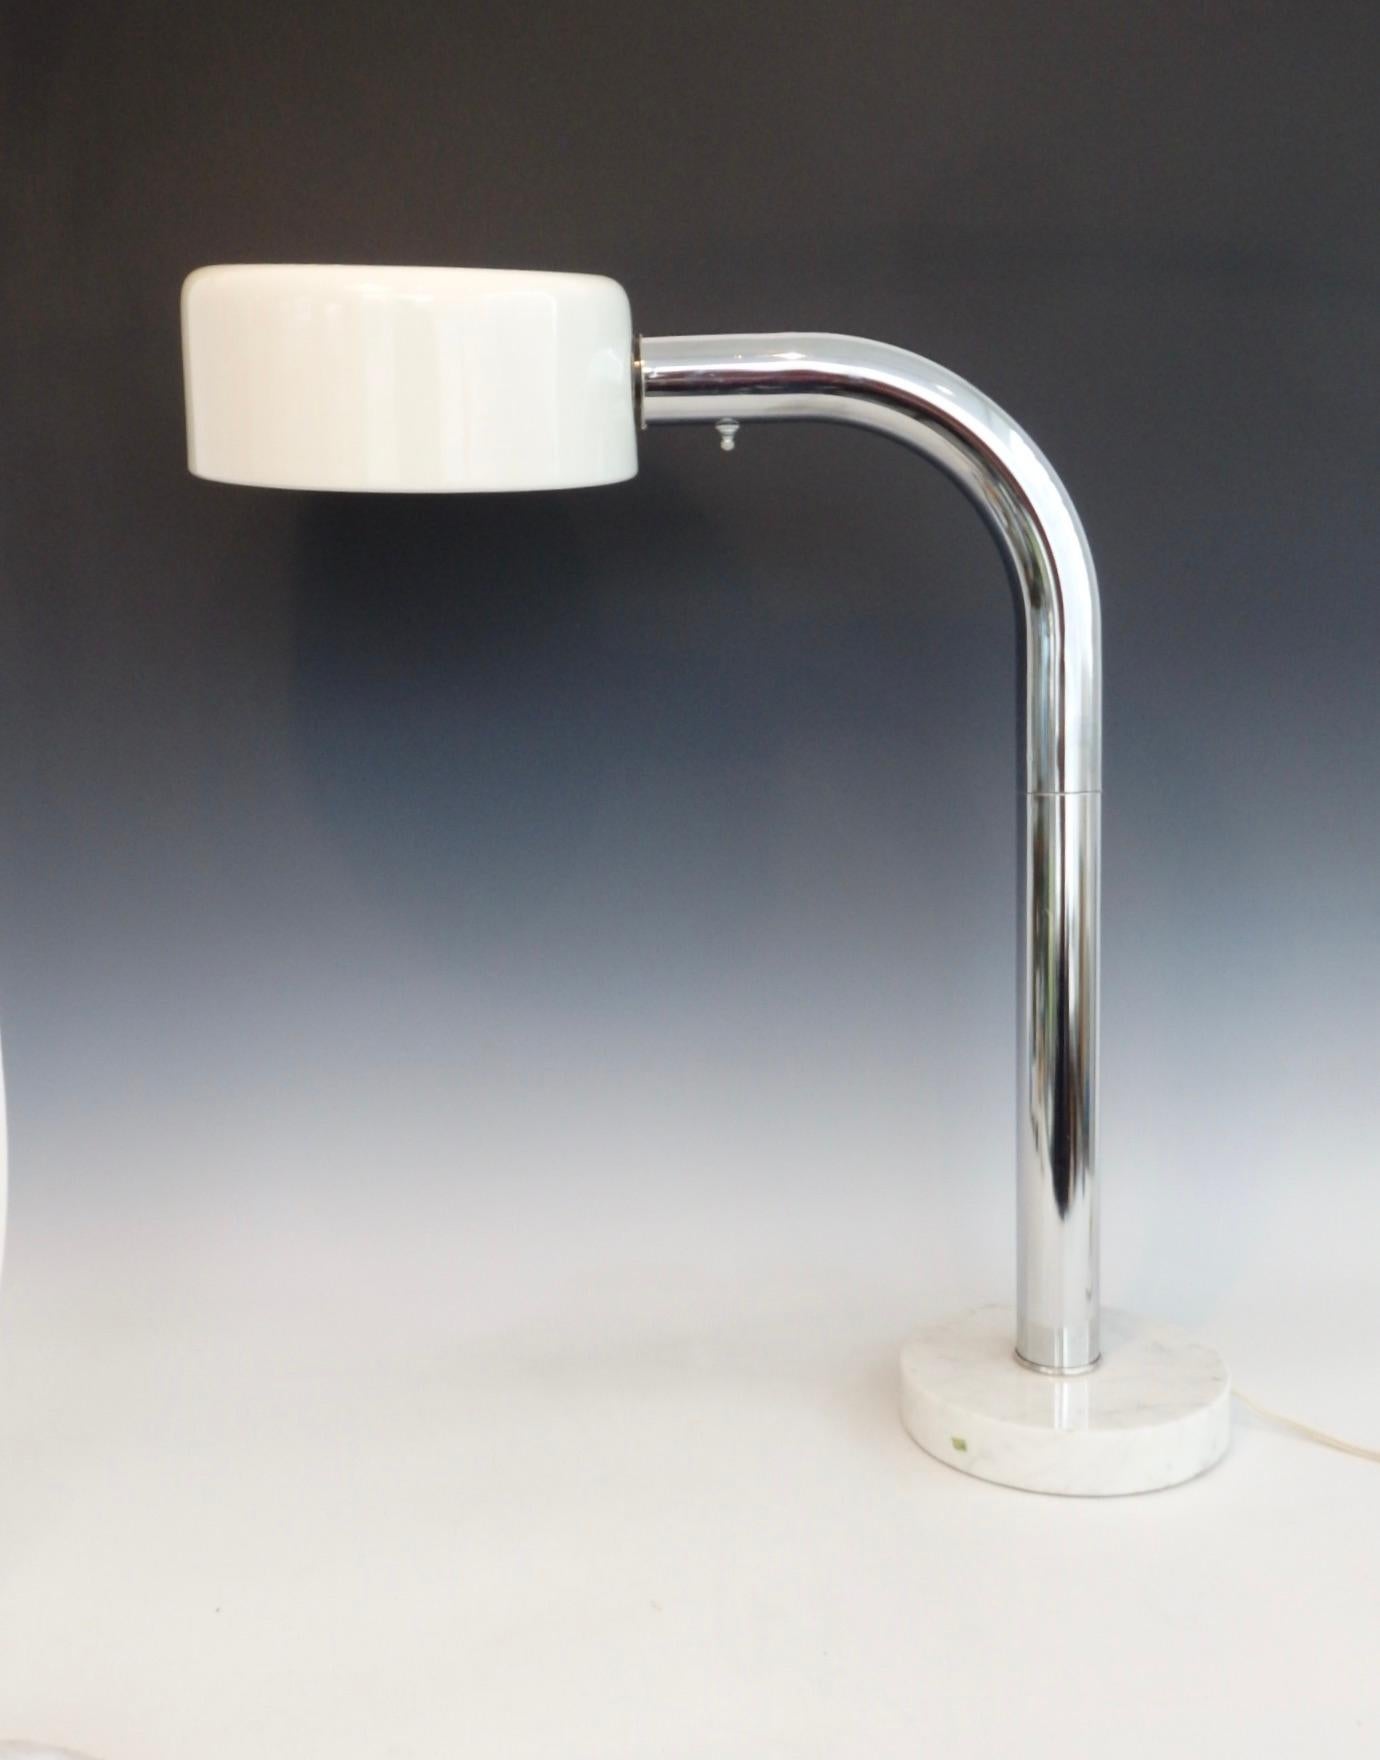 Clean design op pop or mod tall desk lamp. Two inch o.d. chrome shaft rises up from marble base to white lacquered steel diffuser shade. Measurements listed below are with shade removed for shipping. Overall 23